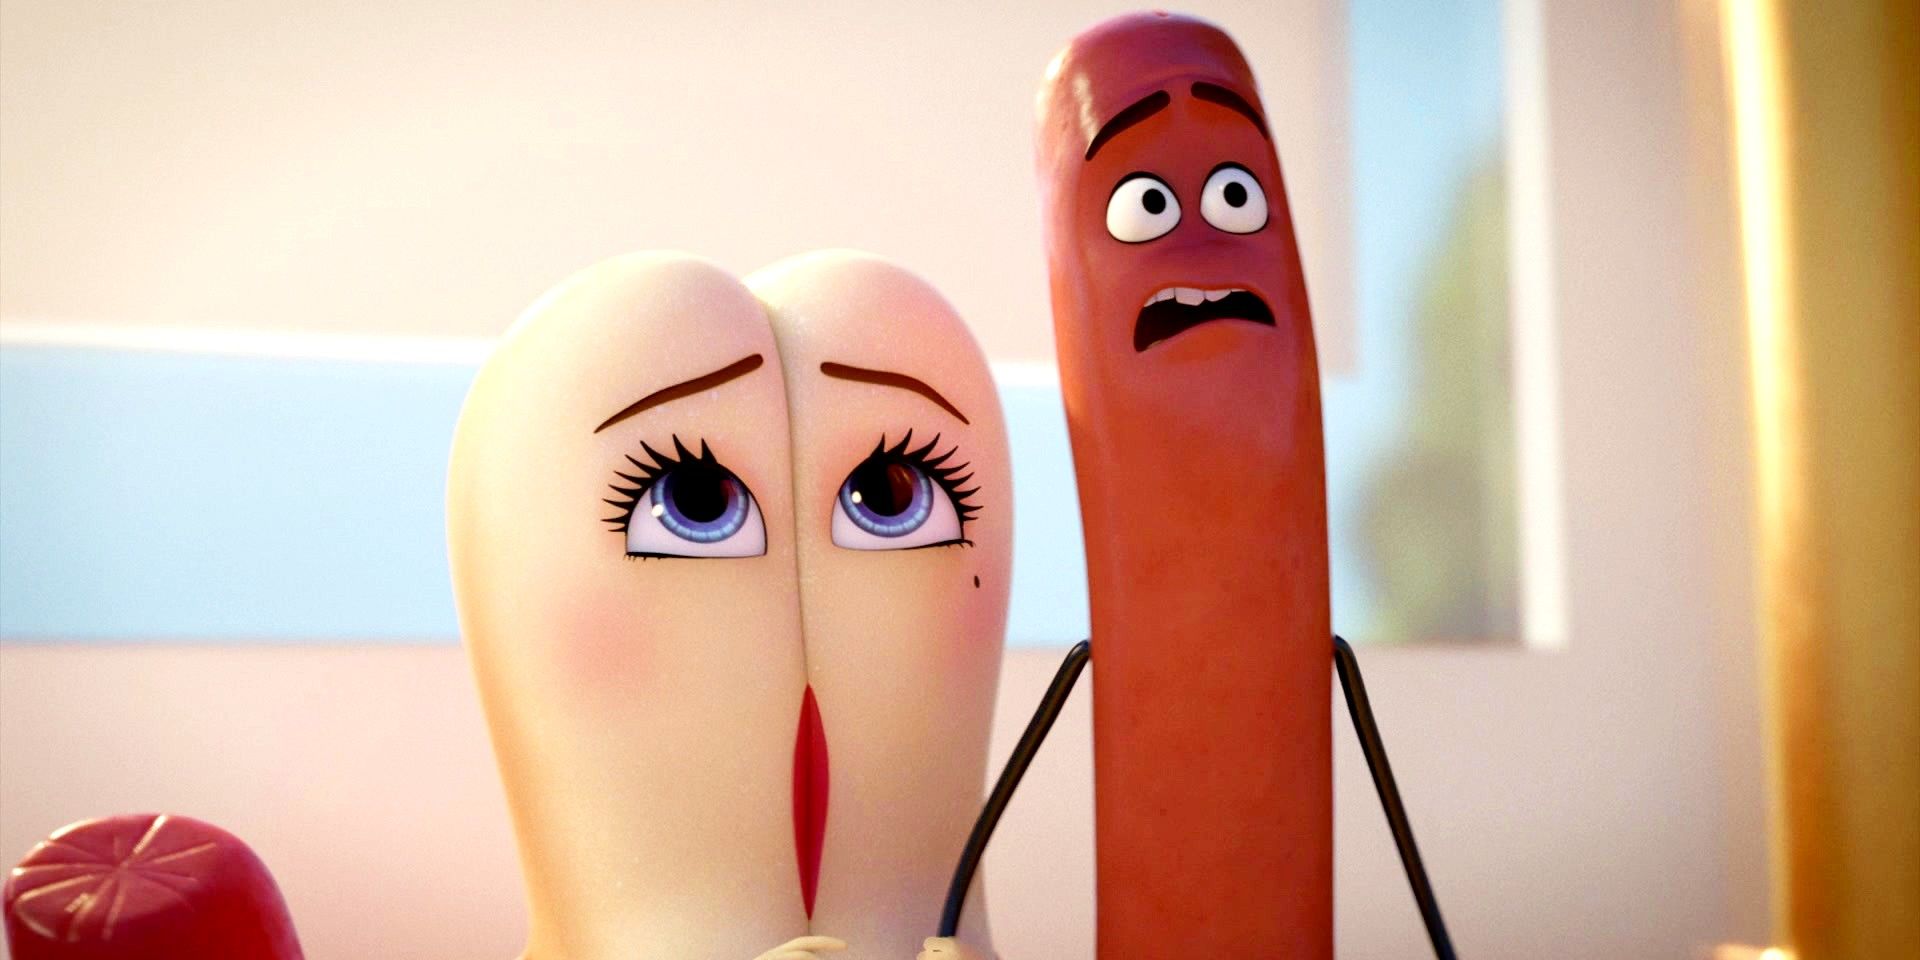 david m nieves recommends Sausage Party Porn Gif